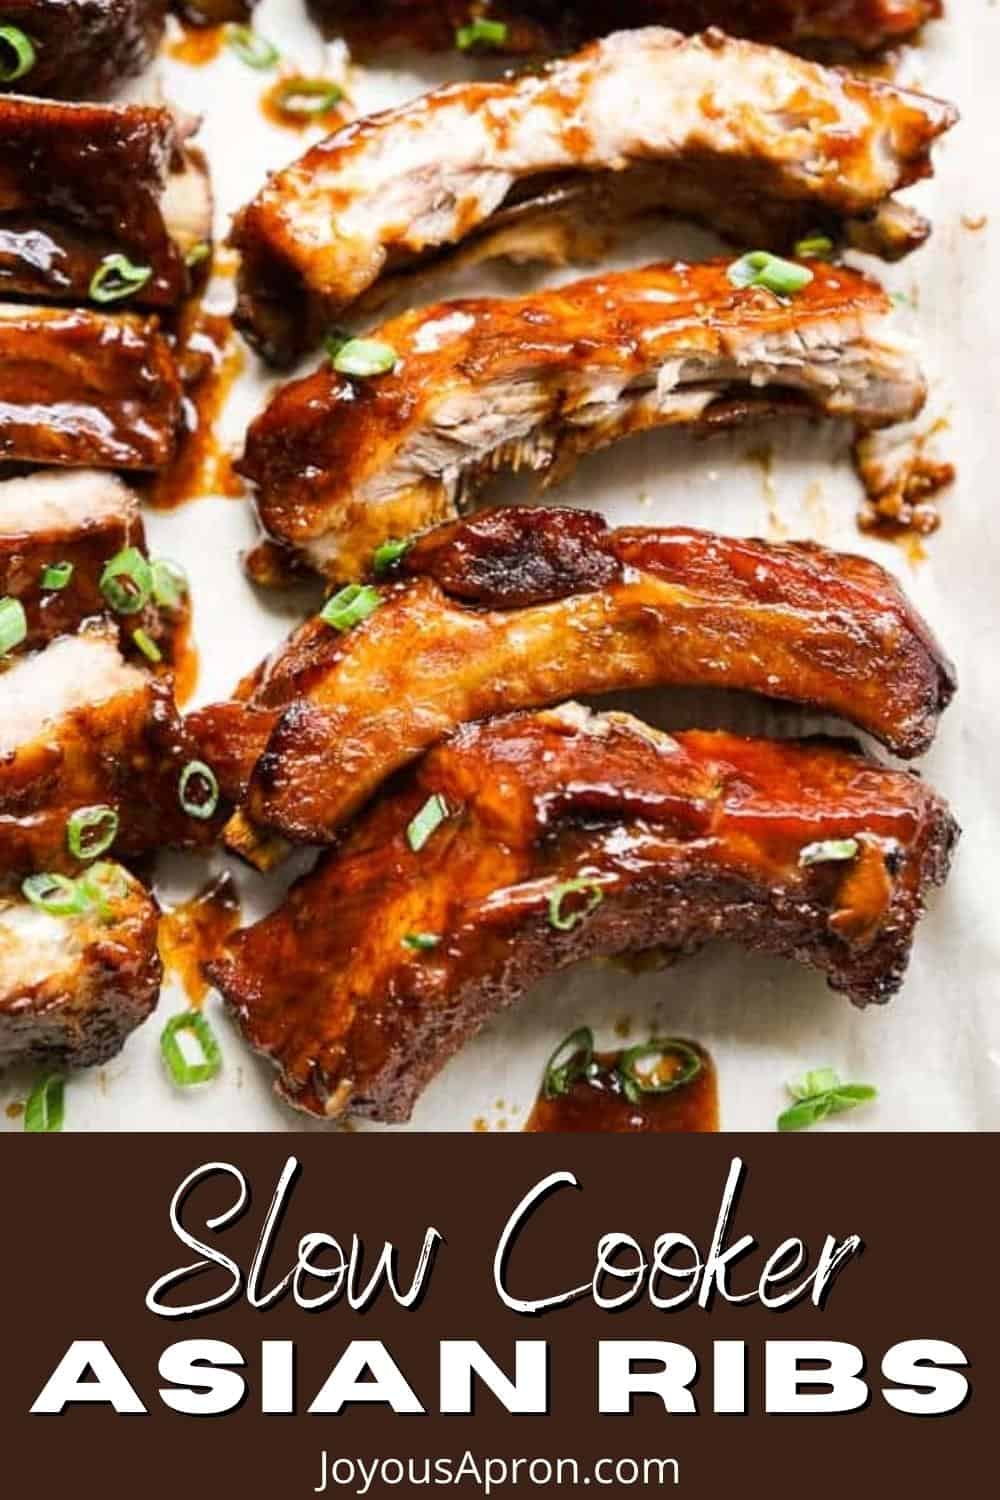 Slow Cooker Asian Ribs - tender baby back pork ribs coated with sticky Asian inspired sauce. Cooked in a slow cooker and then baked to perfection! A delicious crockpot recipe. via @joyousapron